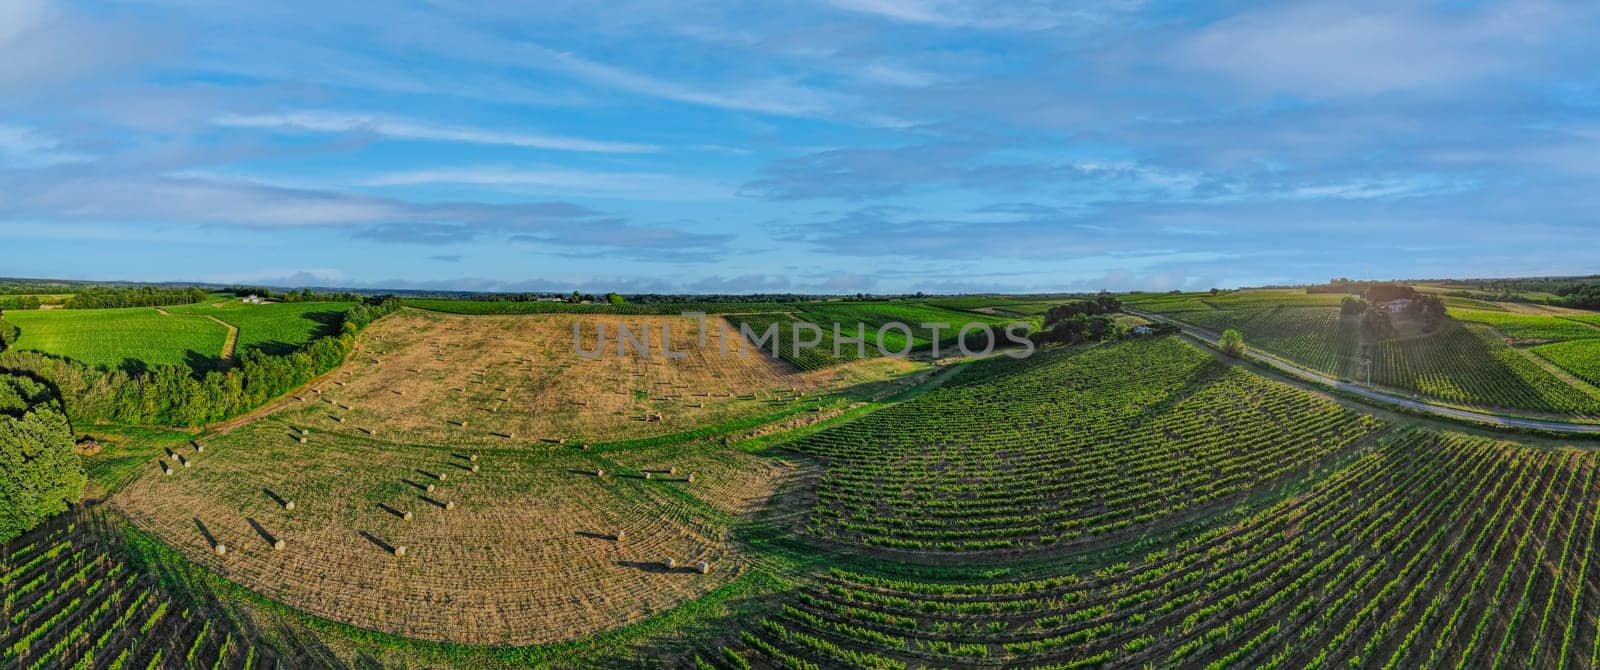 Aerial view Bordeaux Vineyard and forage fields with bales of hay in summer at sunrise by FreeProd